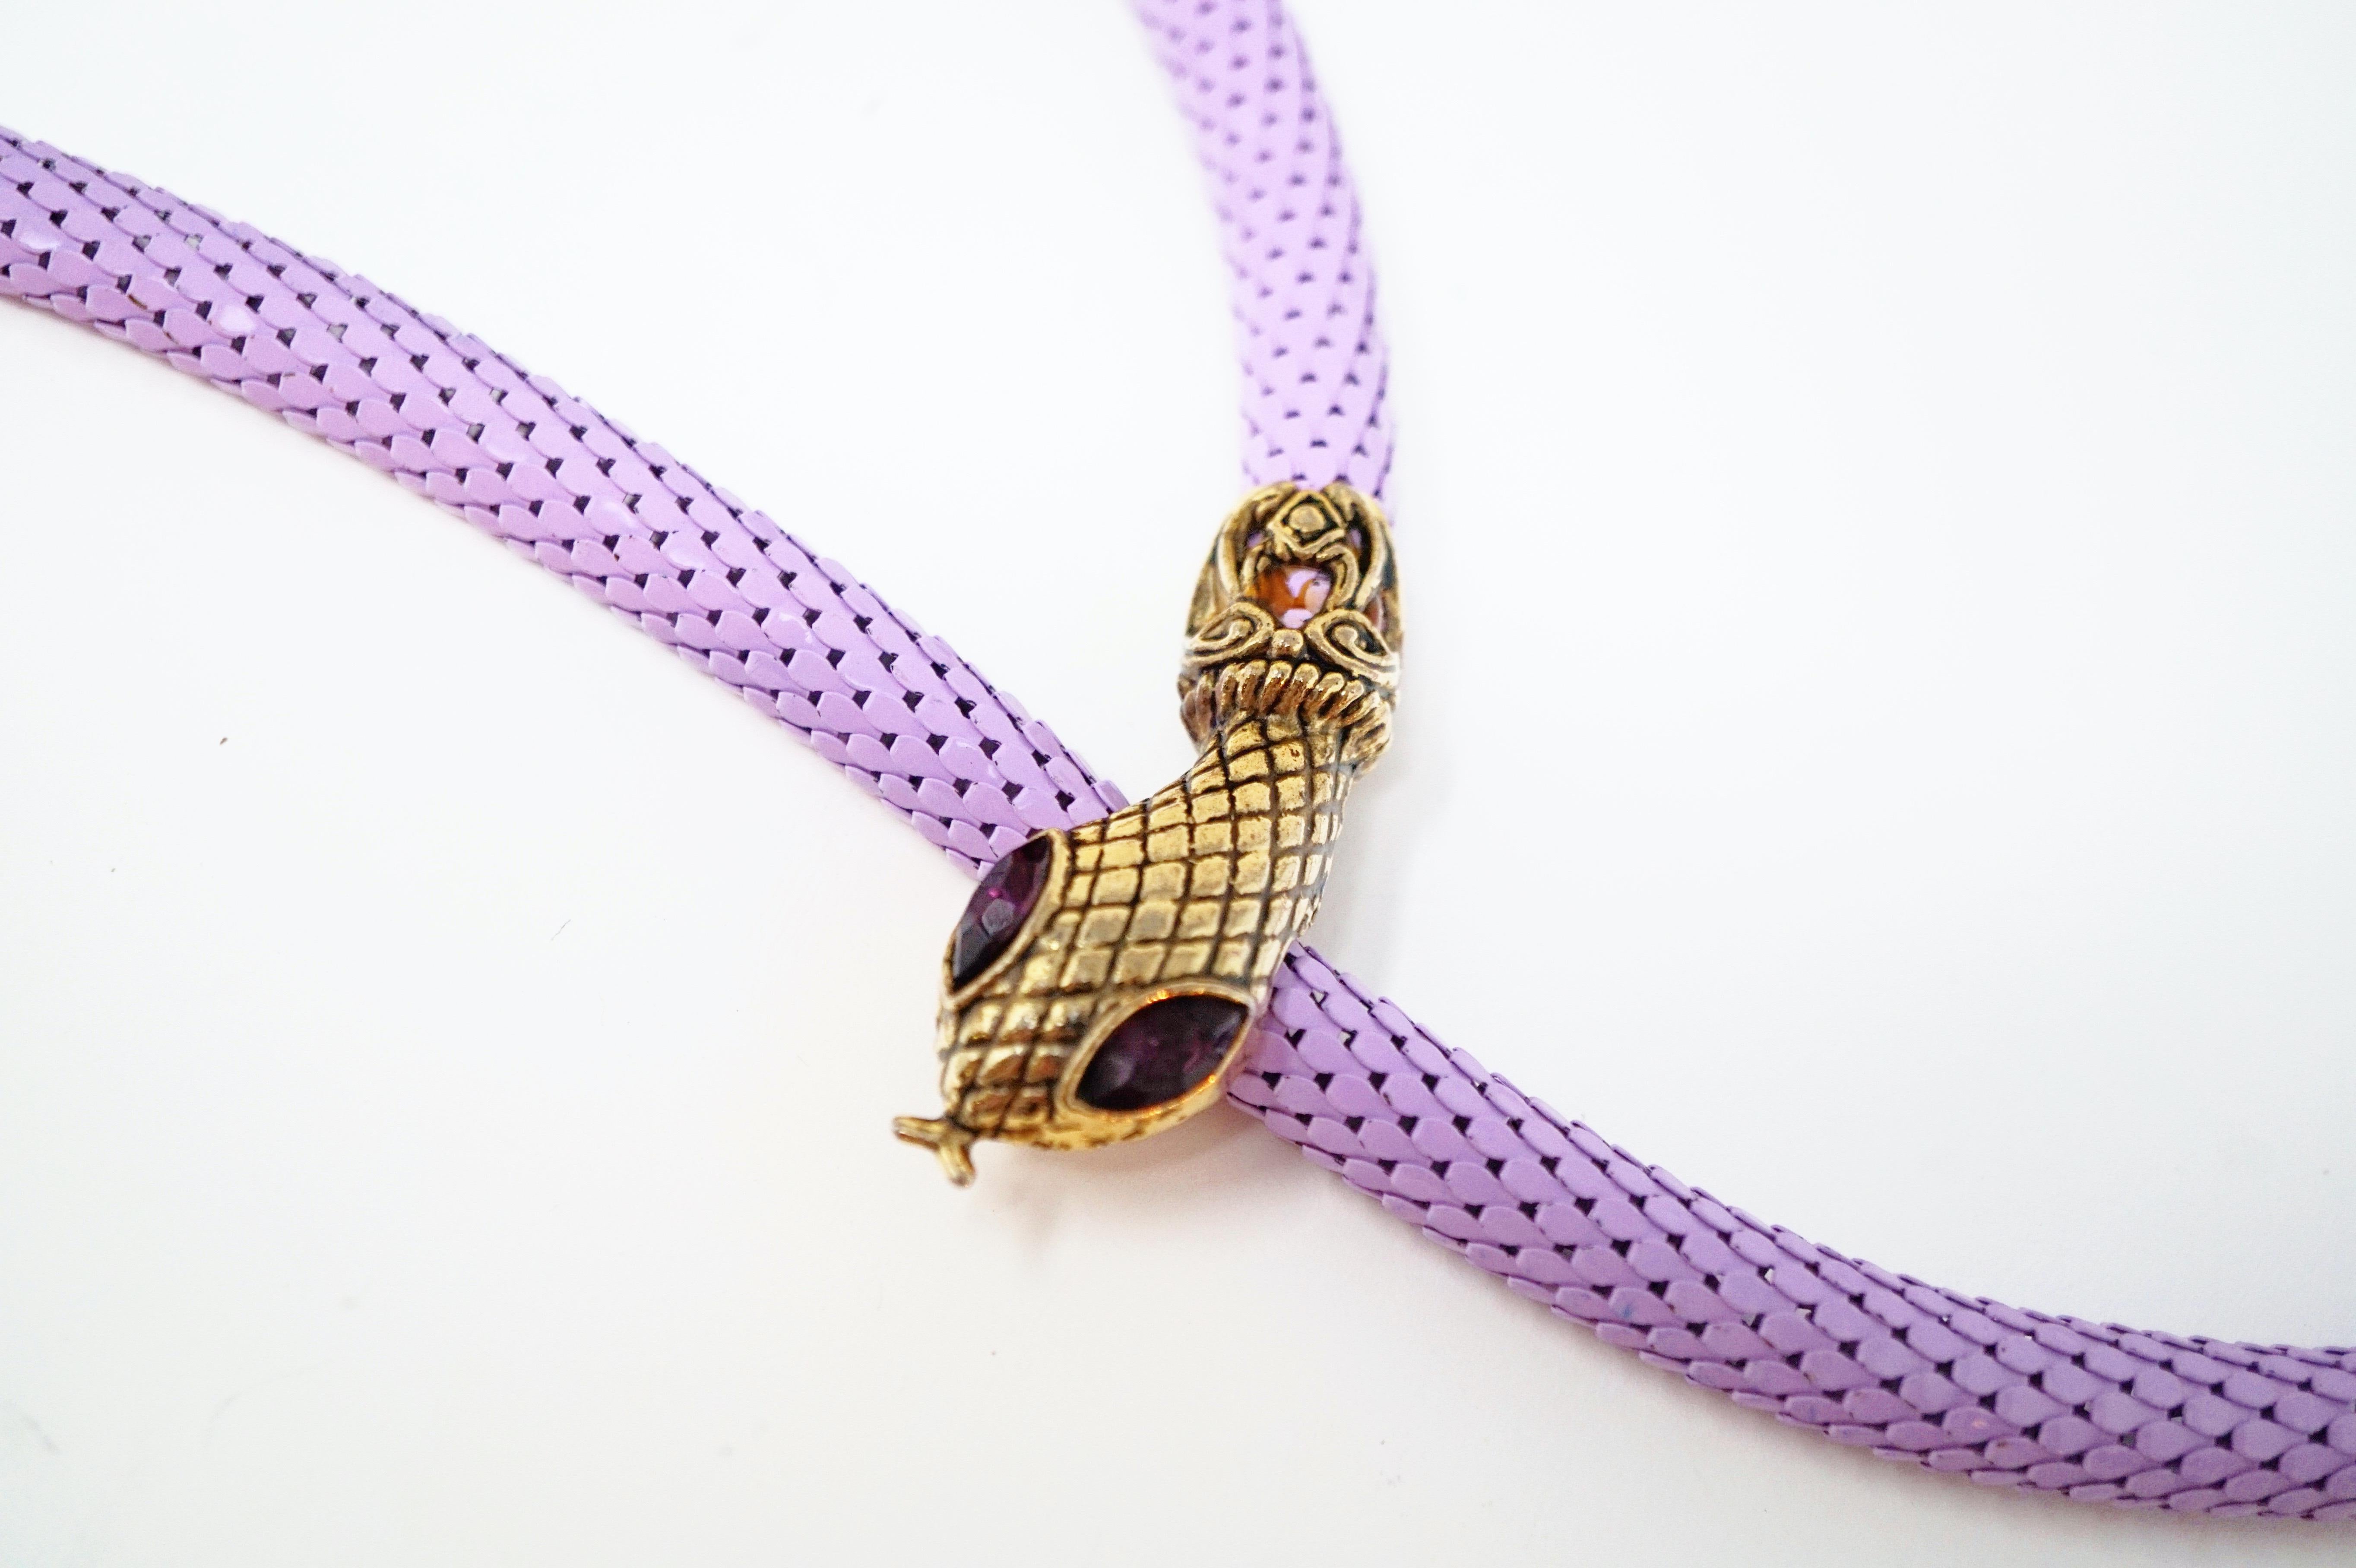 This unique vintage belt, which can also be worn as a necklace, combines lavender purple powder-coated mesh with gold tone snake head and tail embellishments. The golden snake head has Amethyst-colored crystal rhinestone eyes and hides a belt clip